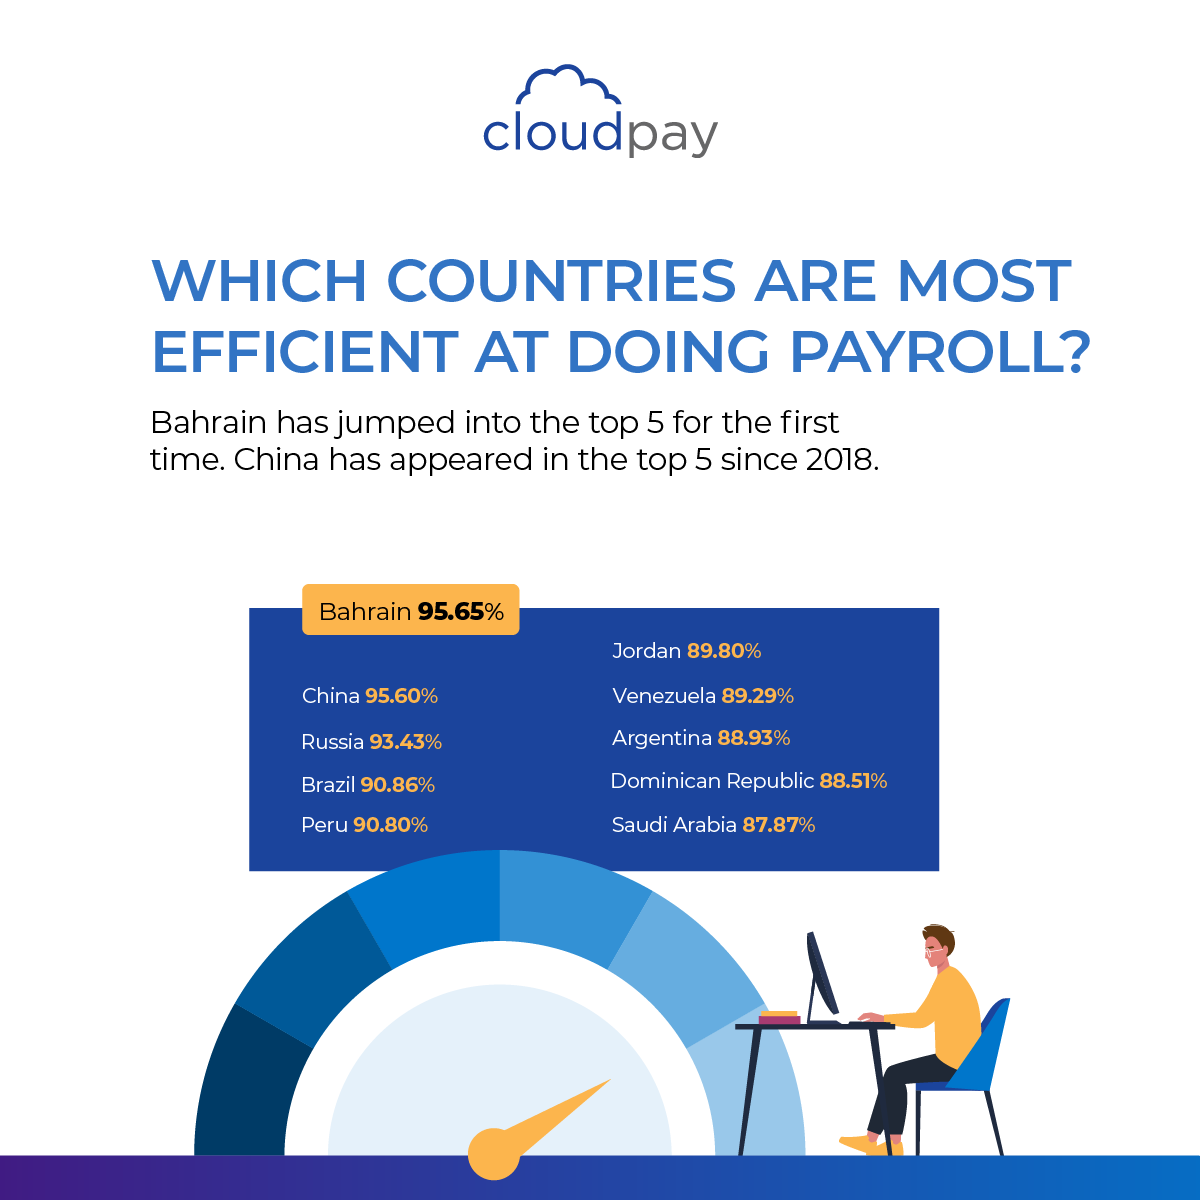 📊 Which countries are most efficient at doing payroll? Take a look at the latest edition of the Payroll Efficiency Index report to find out 
hubs.ly/Q01wtHbQ0 #CloudPay #Payroll #PayrollEfficiency #GlobalPayroll #GreatResignation